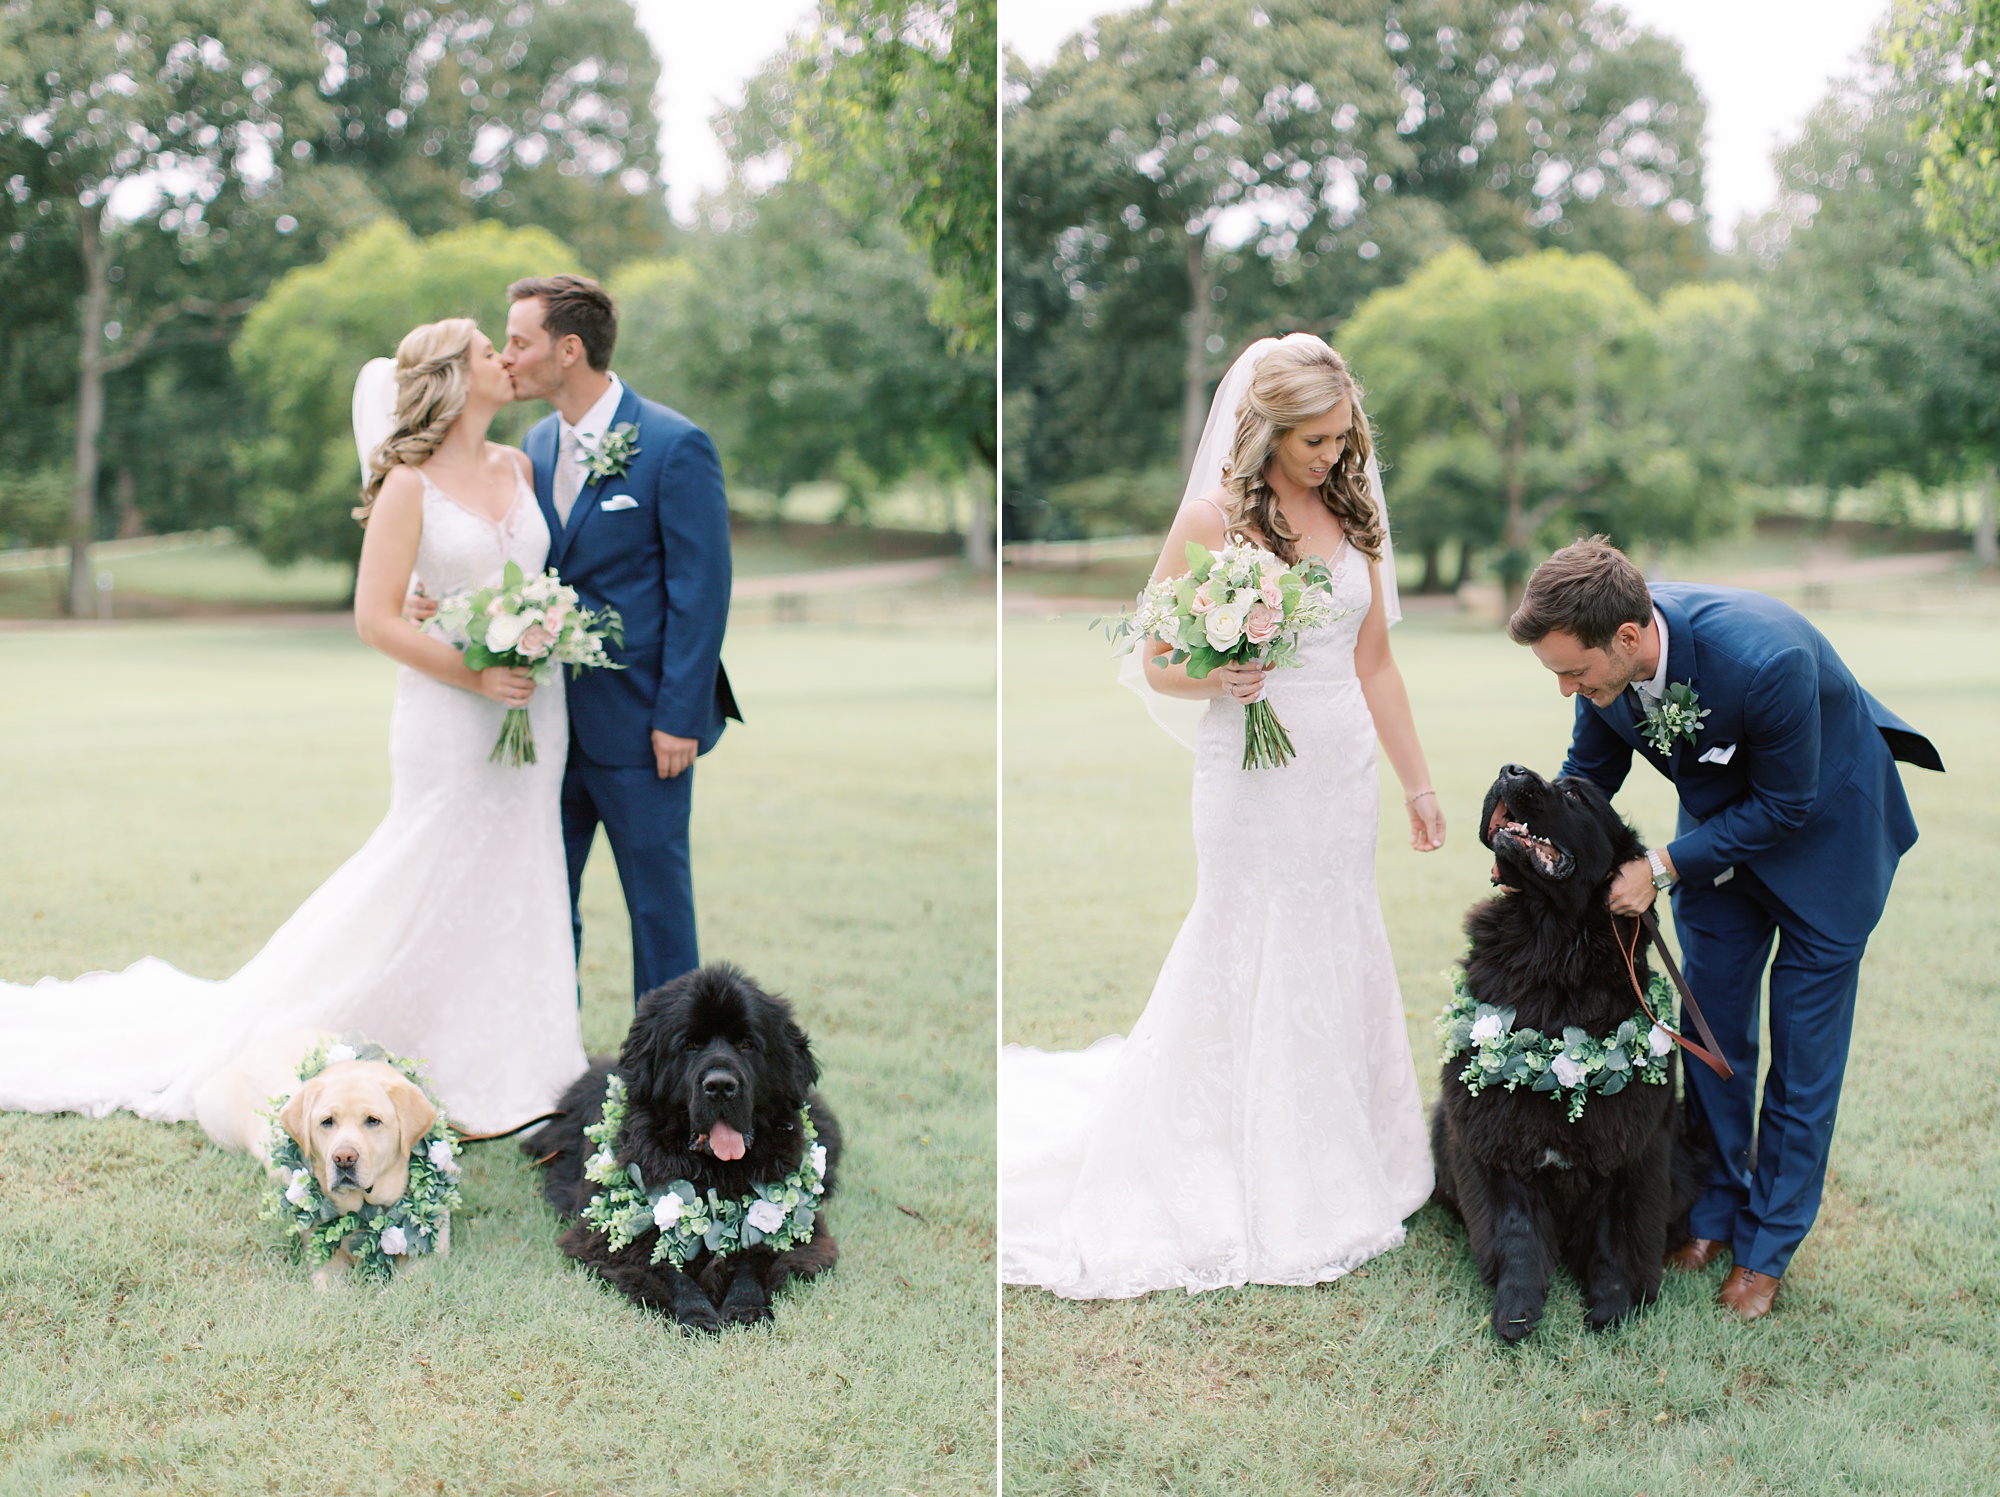 bride and groom pose with two dogs in green floral collars